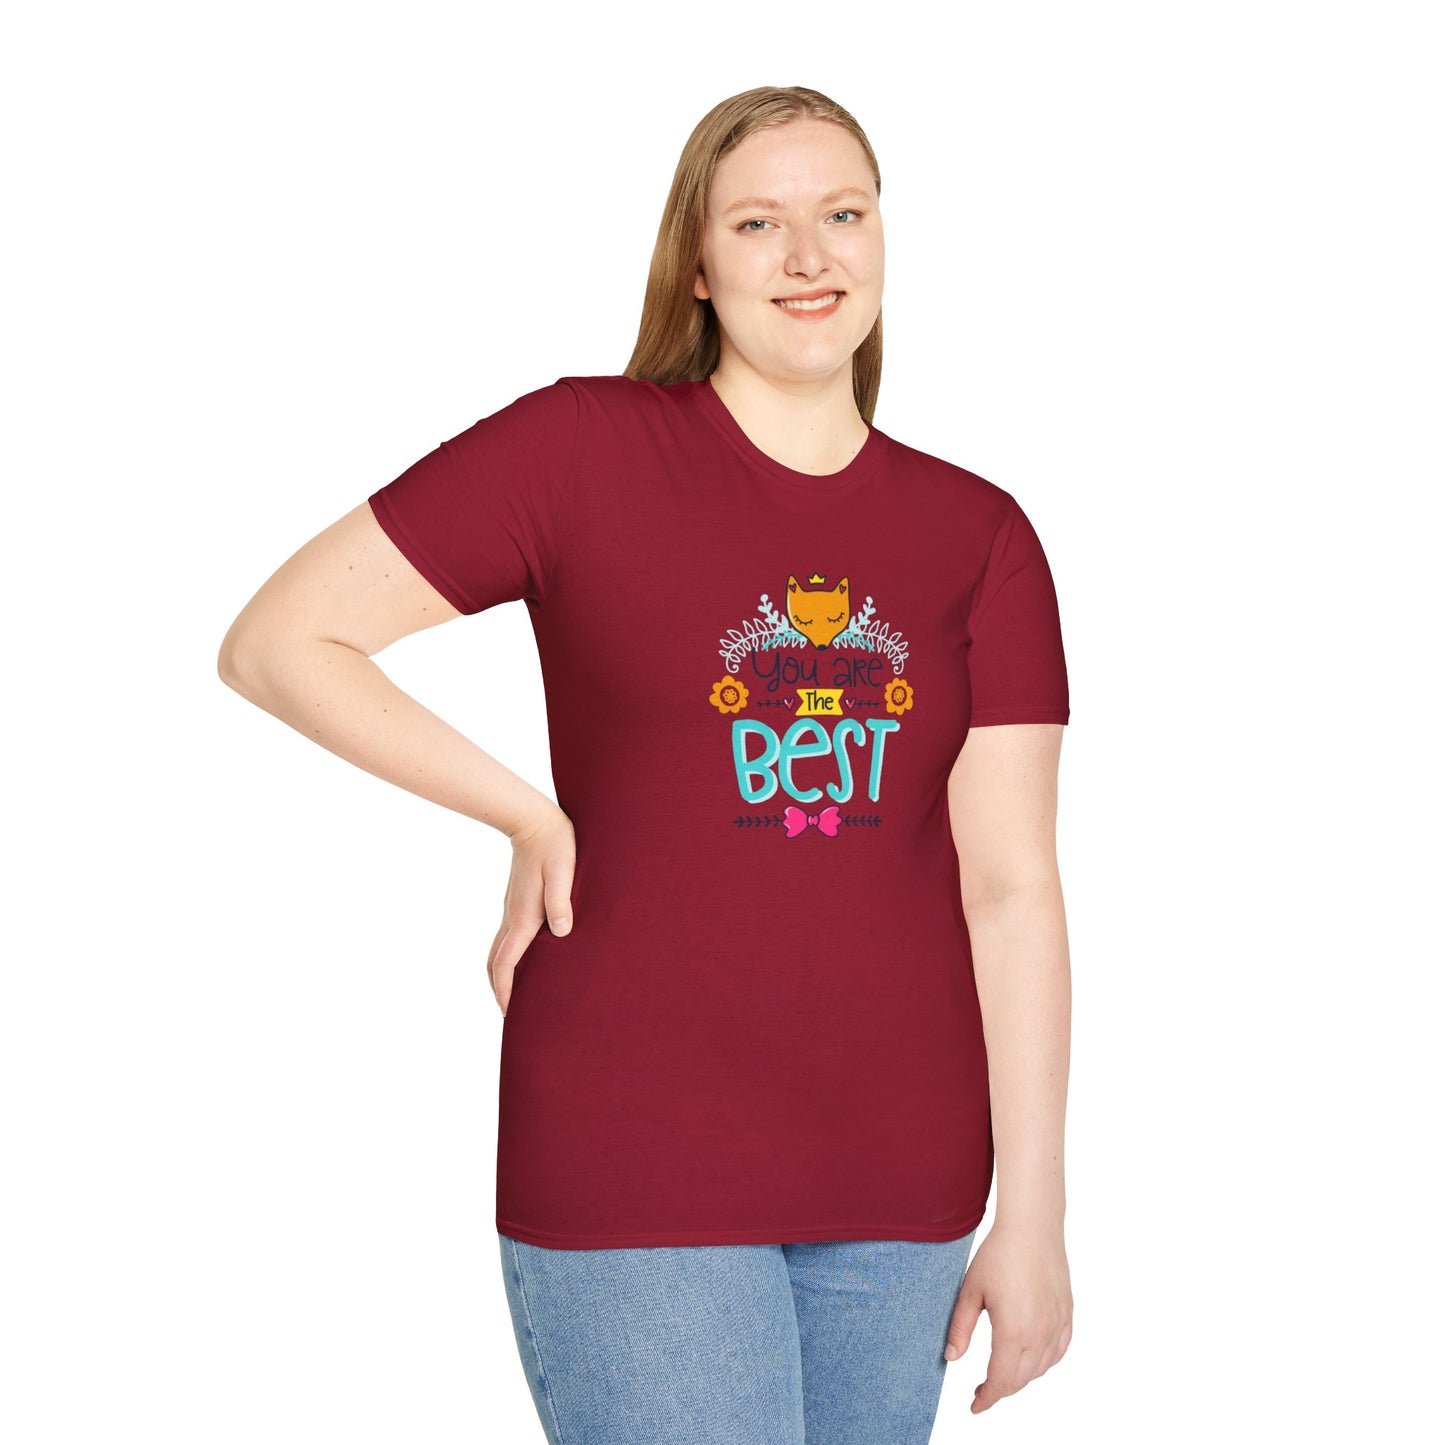 You Are the Best T-shirts: Elevate Your Style with Confidence-Boosting Apparel!